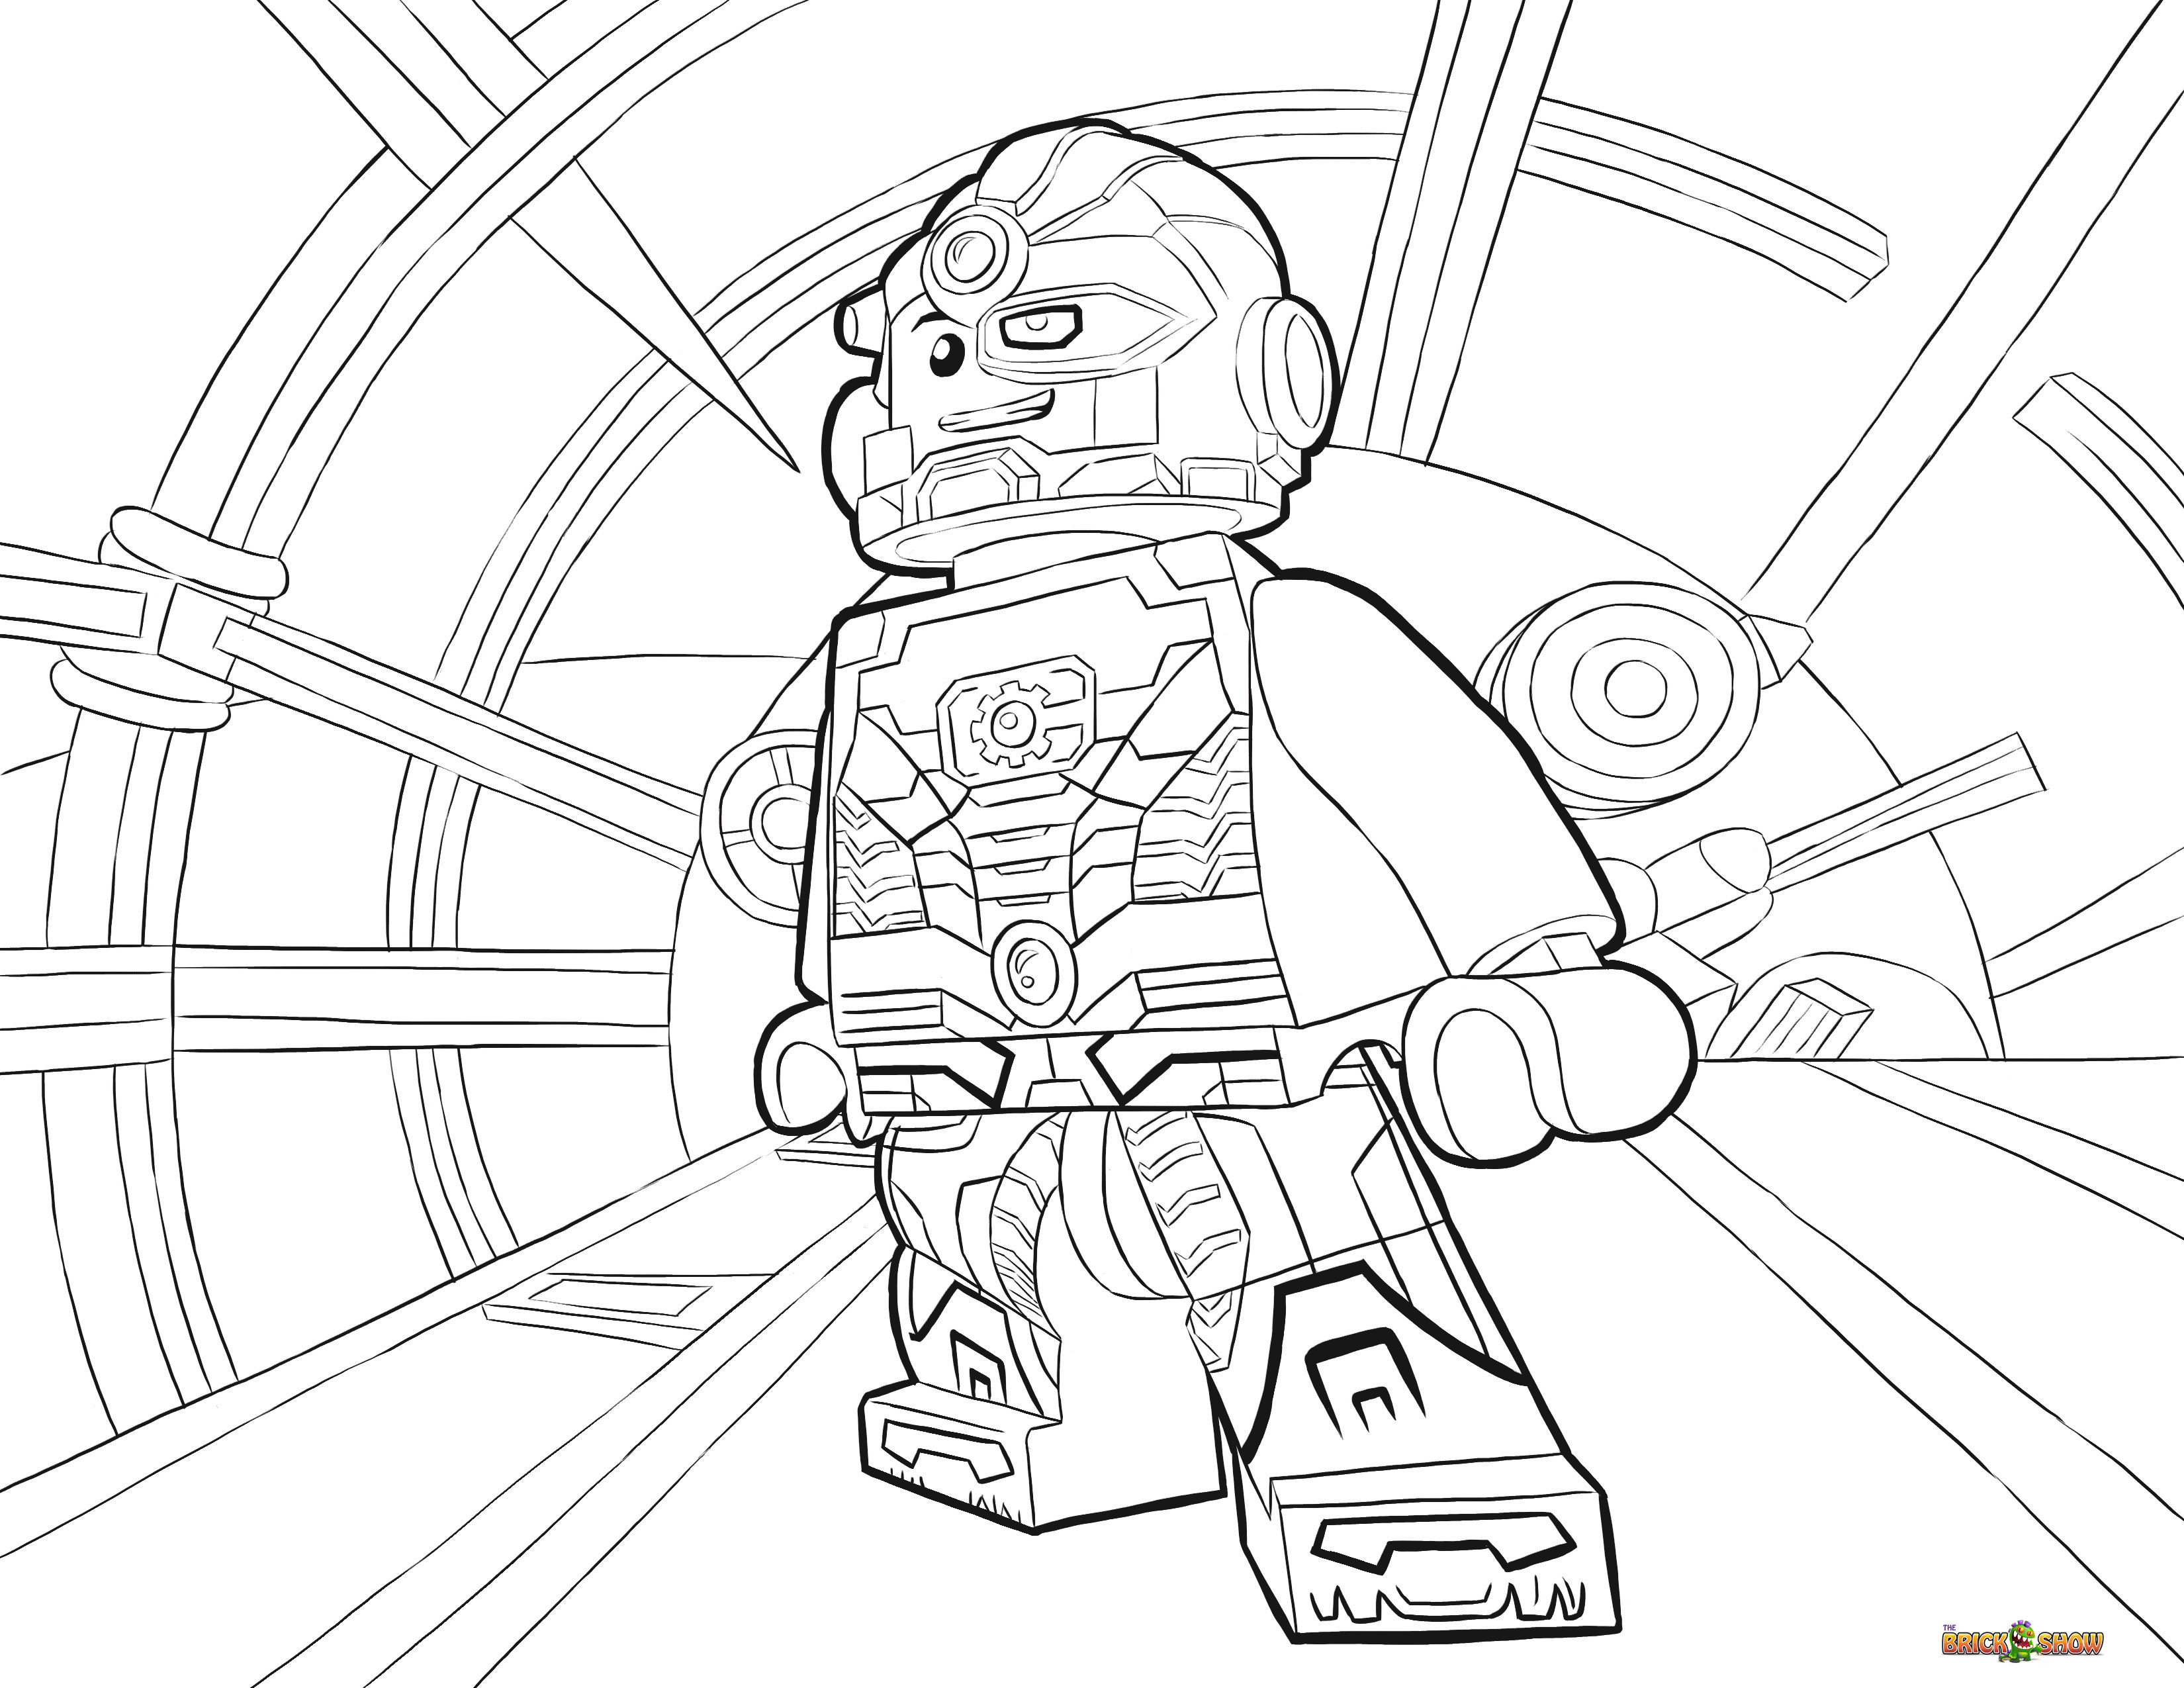 Free Coloring Pages Lego Avengers, Download Free Coloring Pages ...